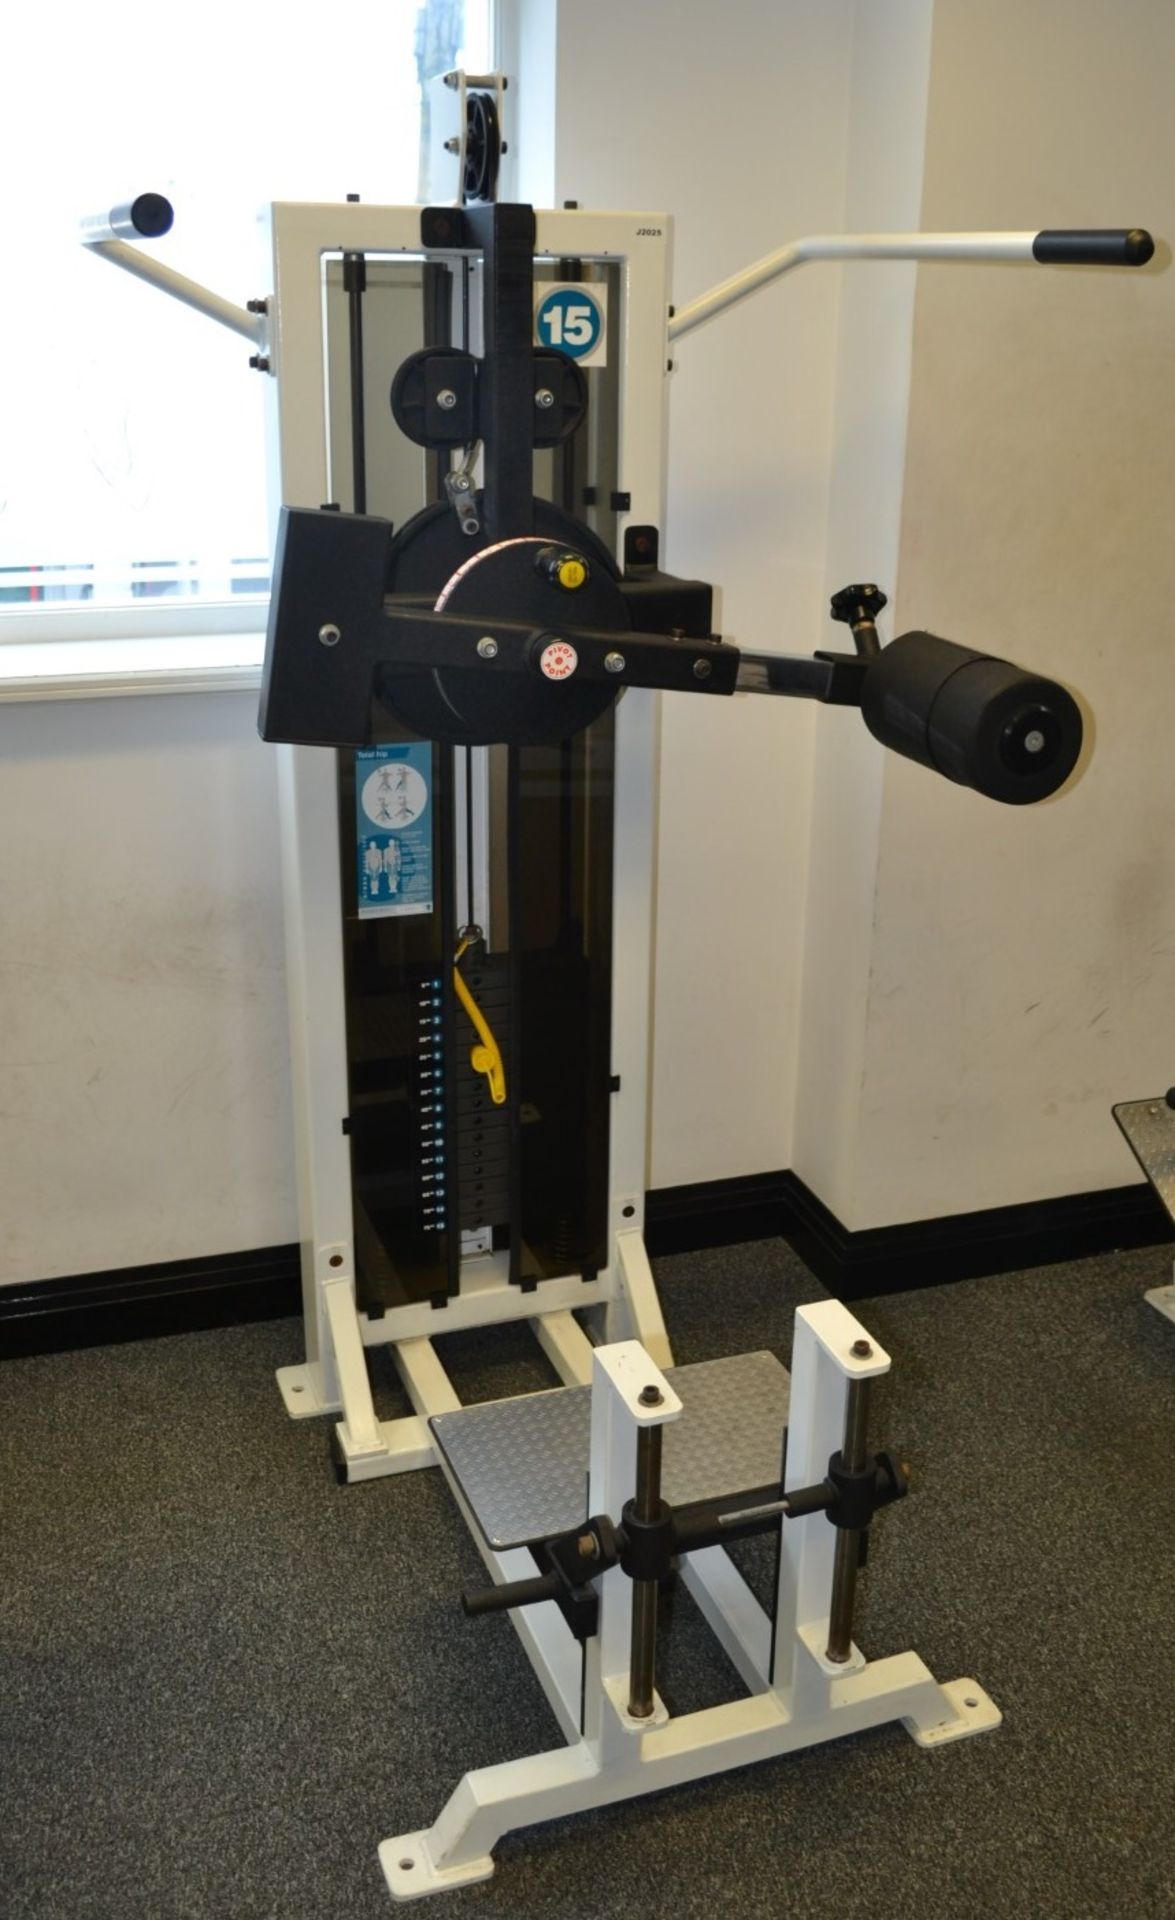 1 x Force Total Hip Pin Loaded Gym Machine With 75kg Weights - Ref: J2025/1FG - Image 3 of 3